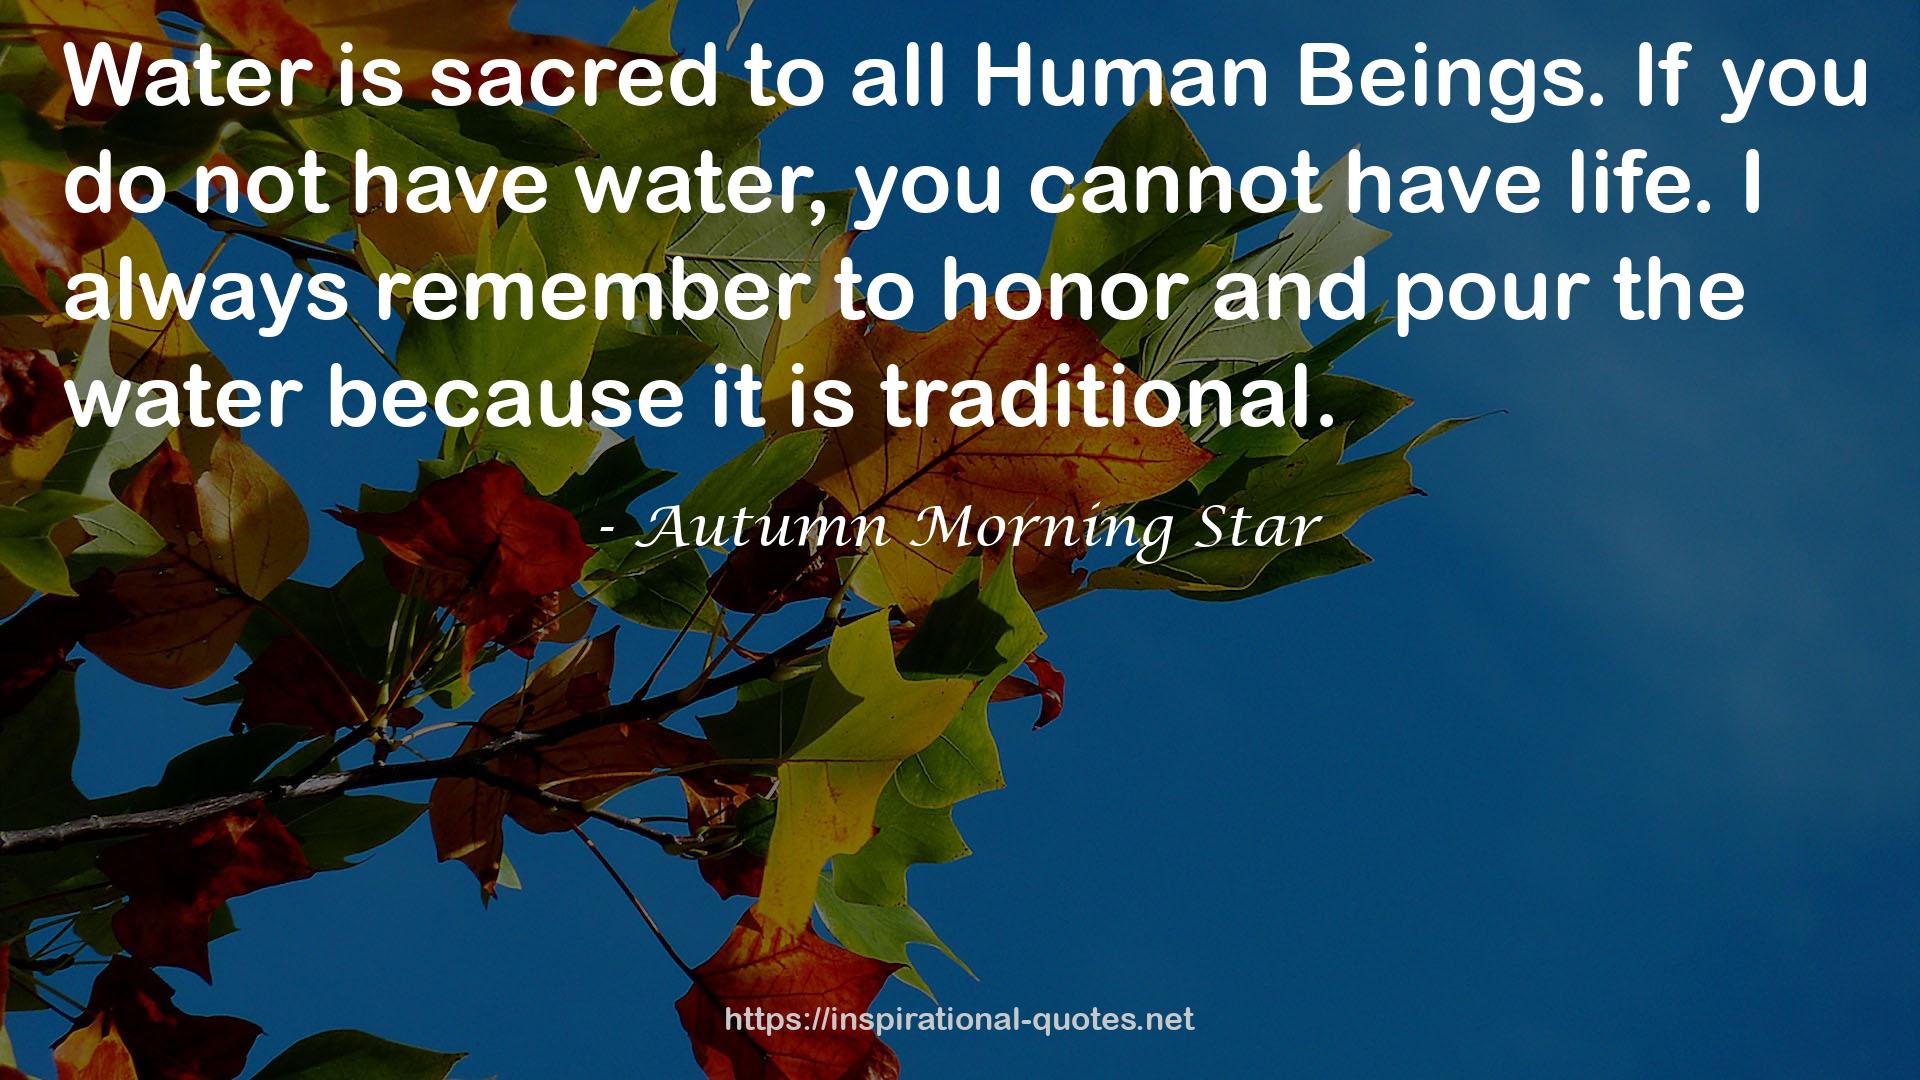 Autumn Morning Star QUOTES